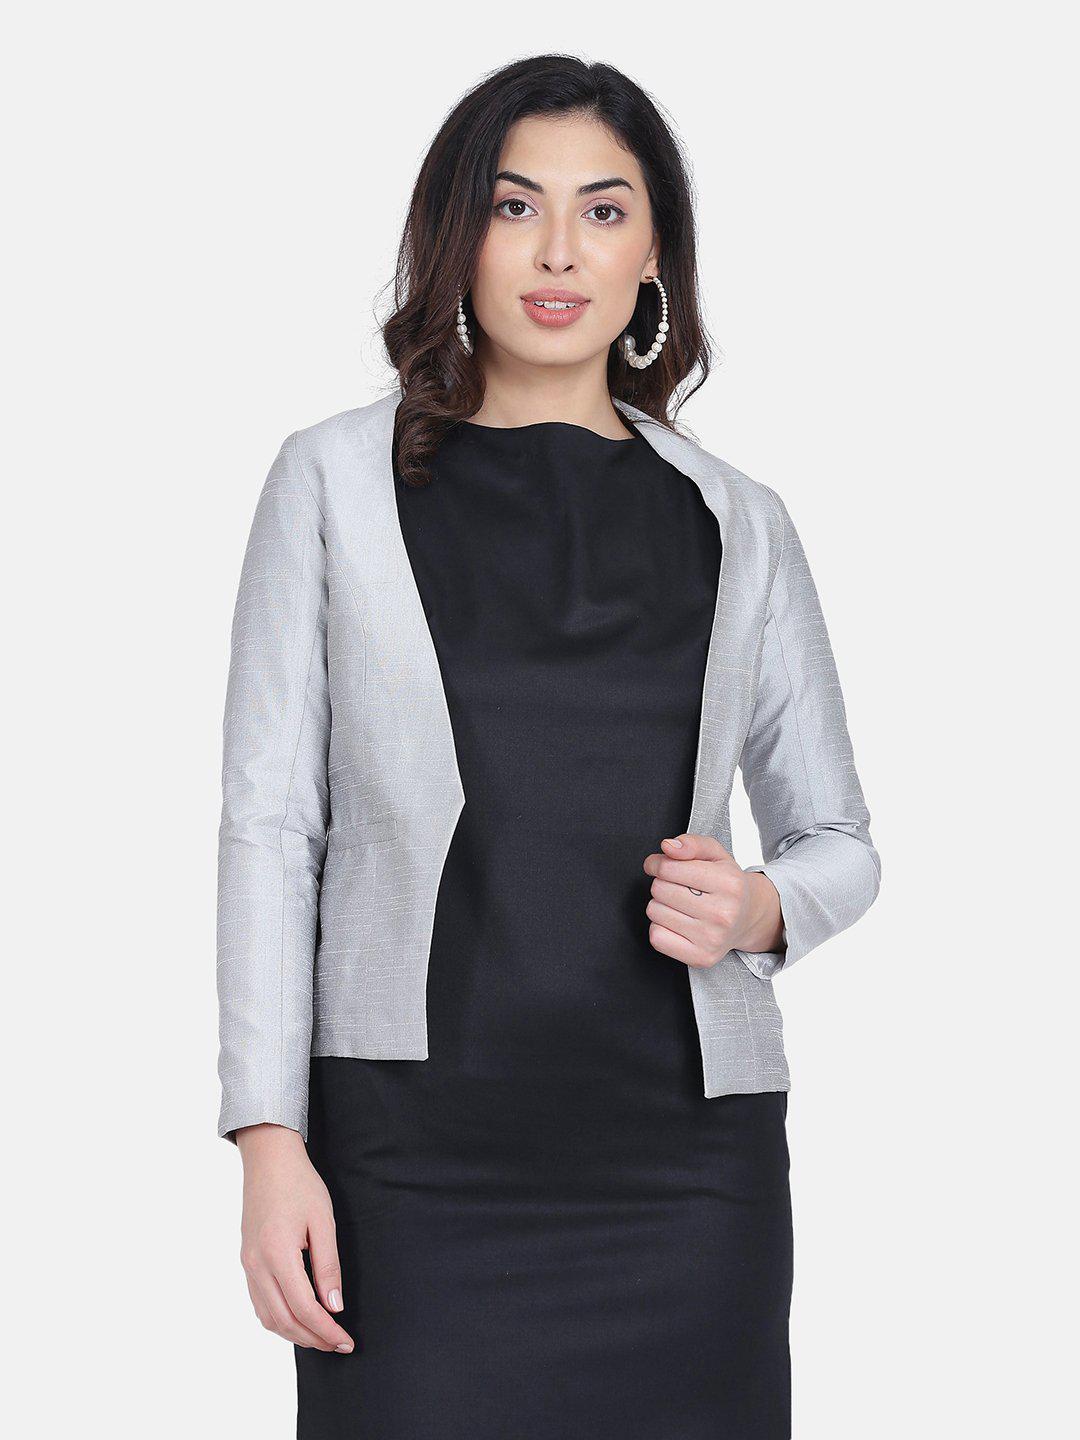 Dupioni Open Front Jacket For Women -Silver Grey